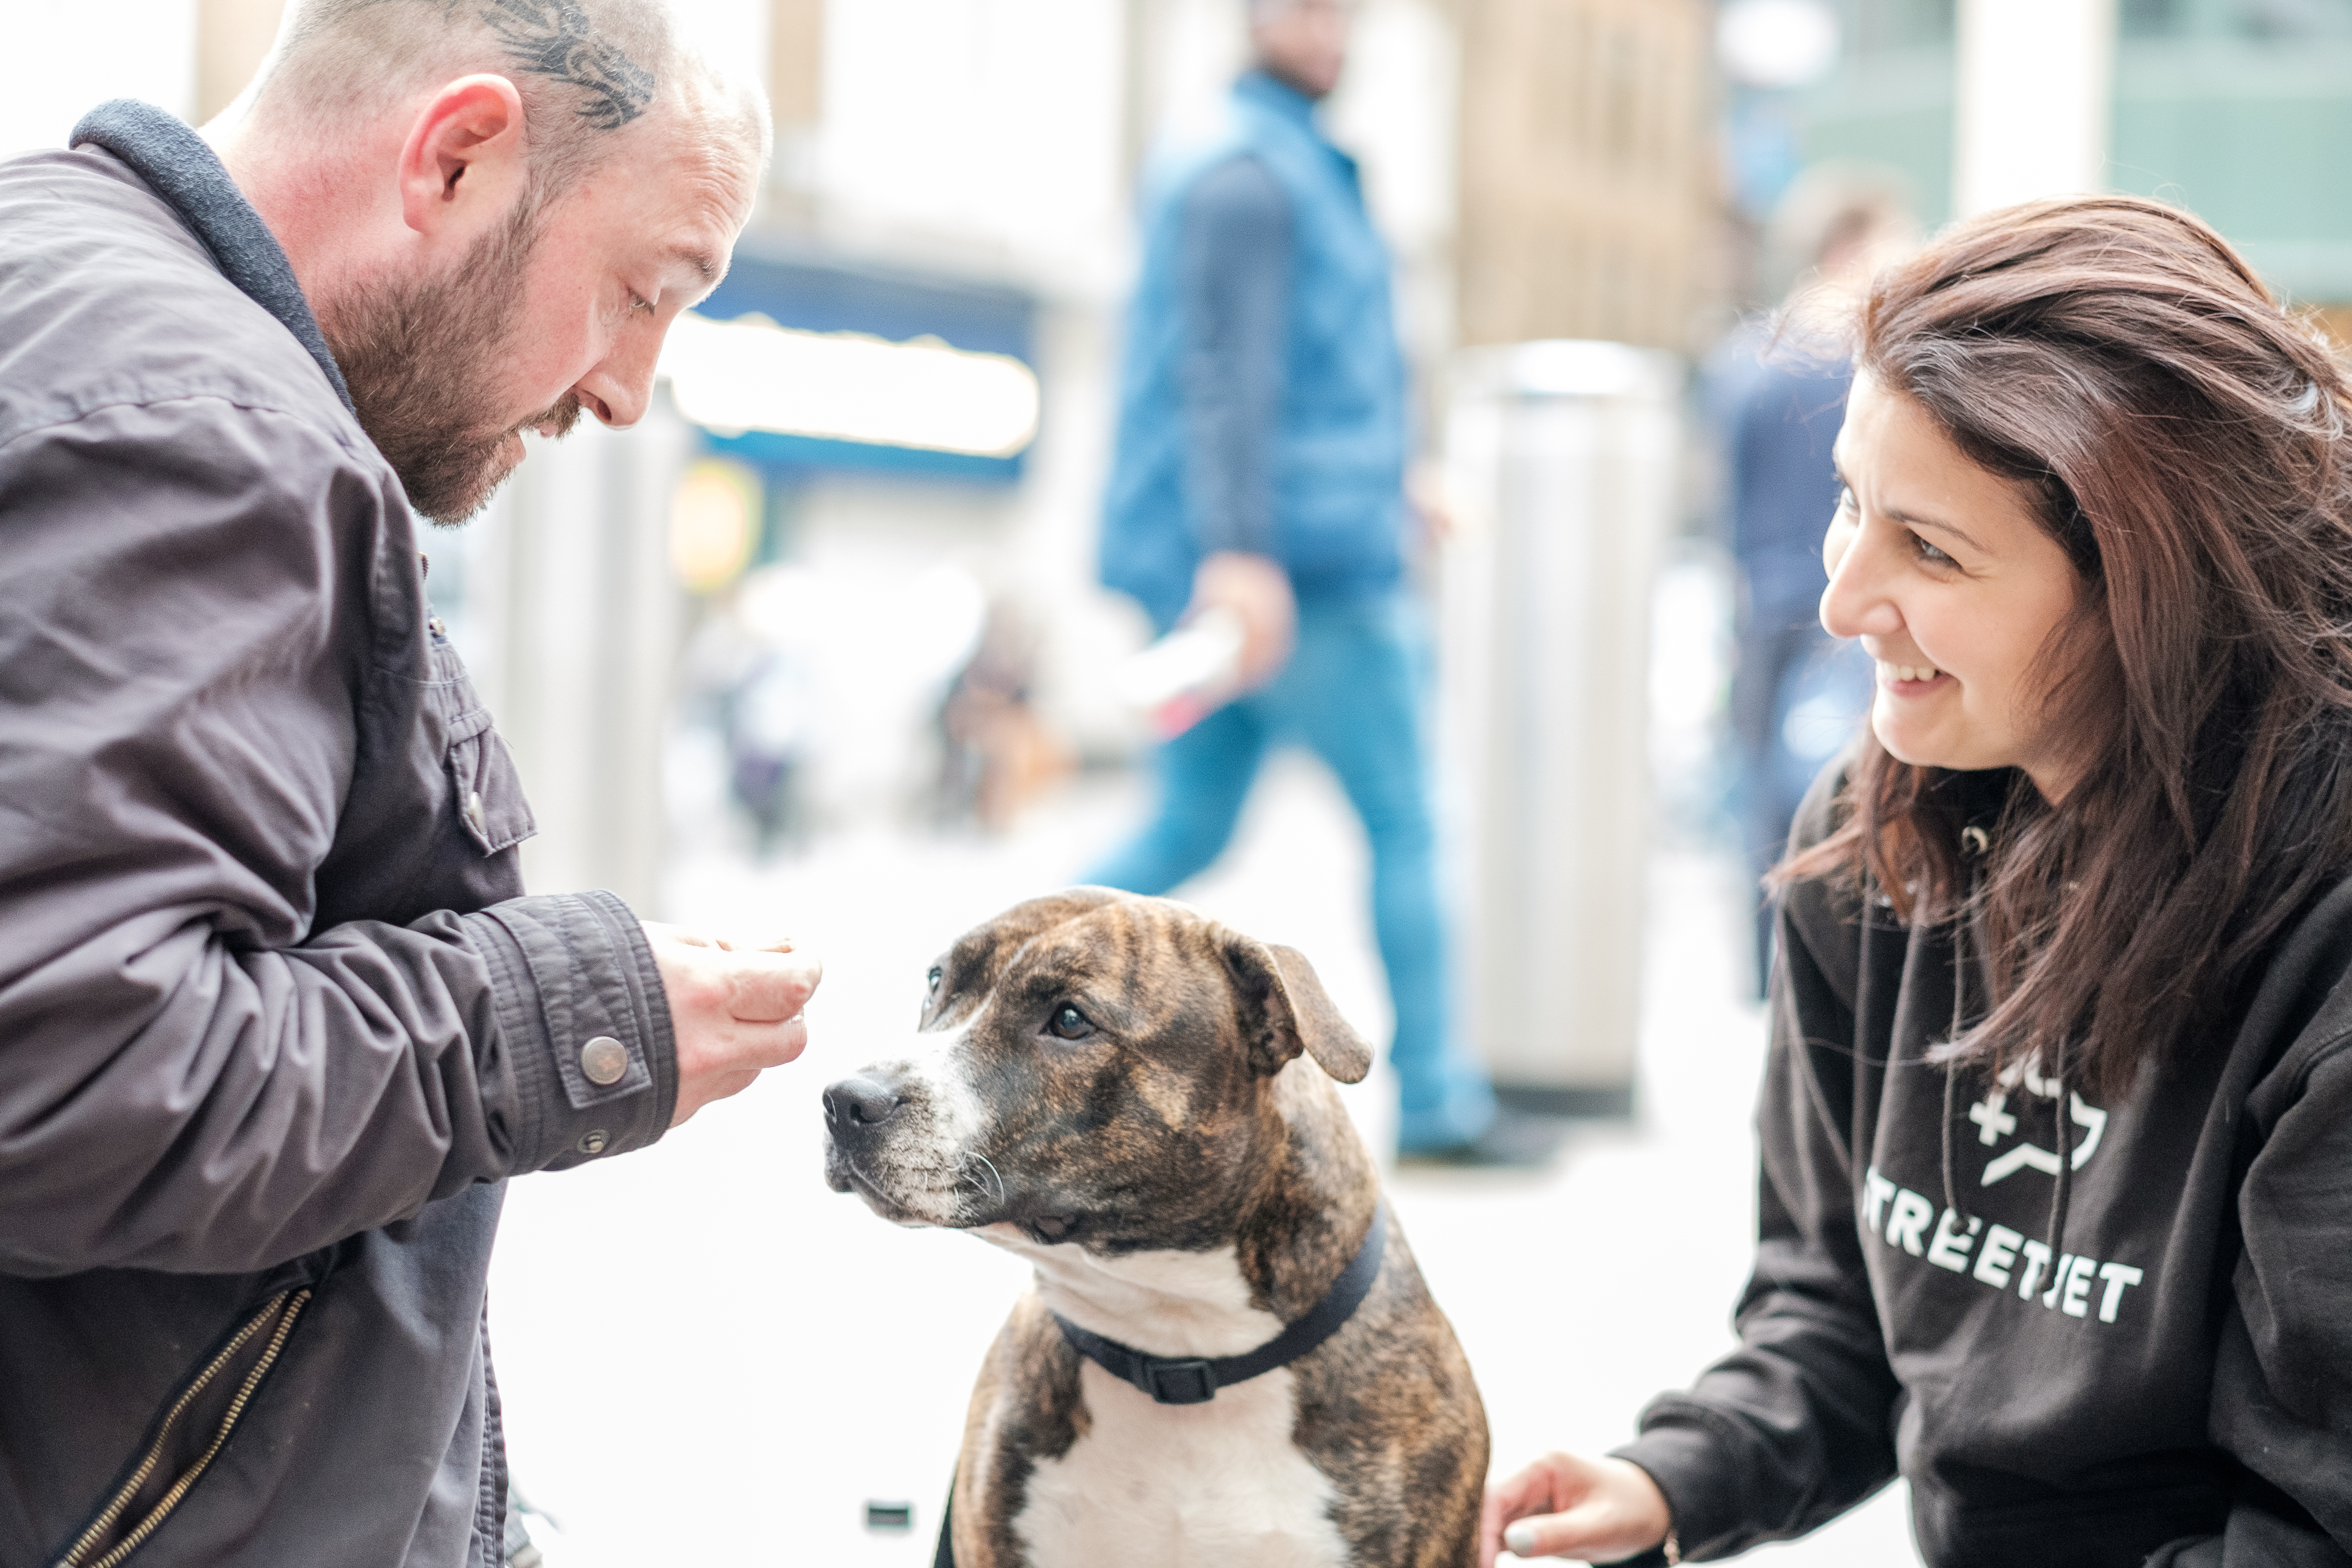 New Scheme To Help Homeless People and Their Pets Get Off The Streets